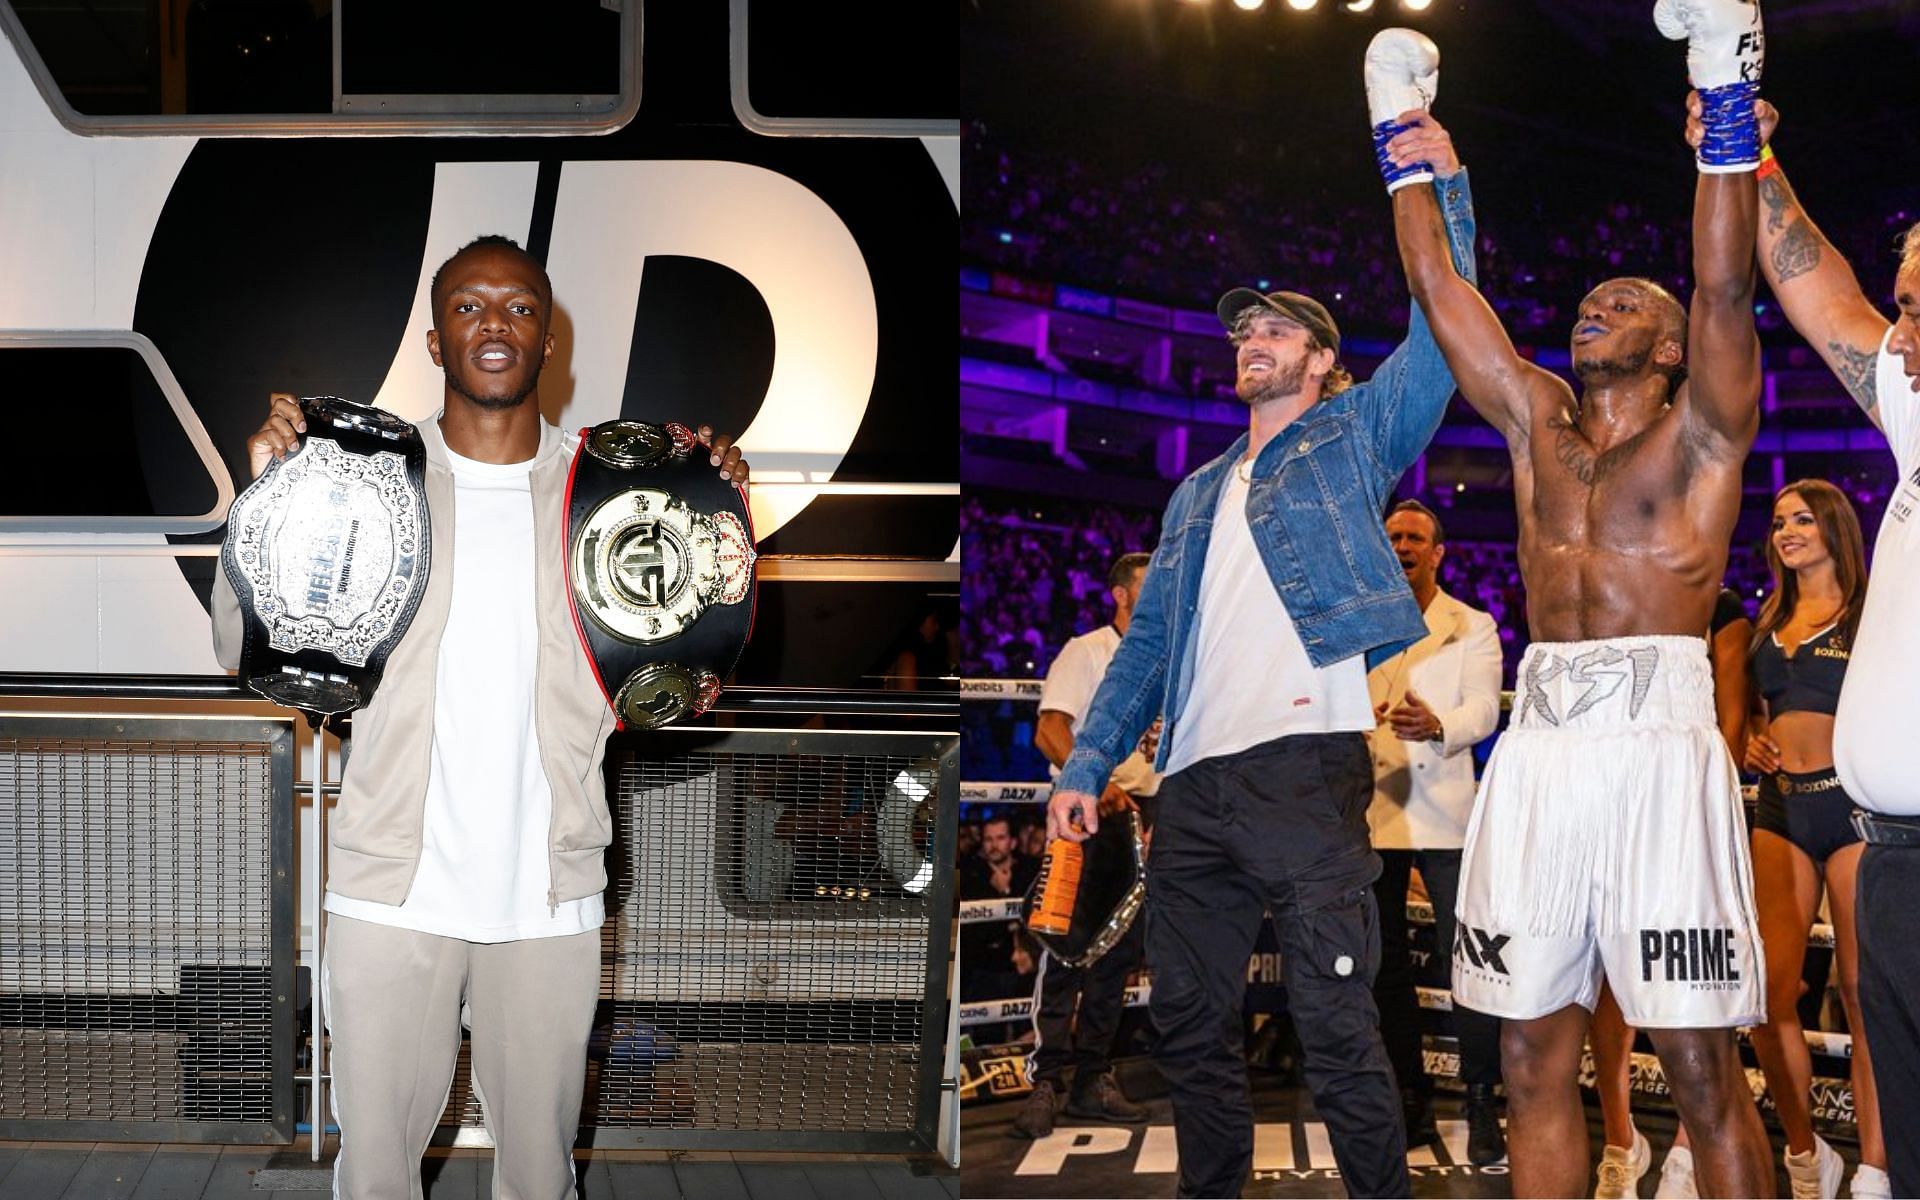 KSI (left) and KSI with Logan Paul (right) (Image credits Getty Images and @loganpaul on Twitter)